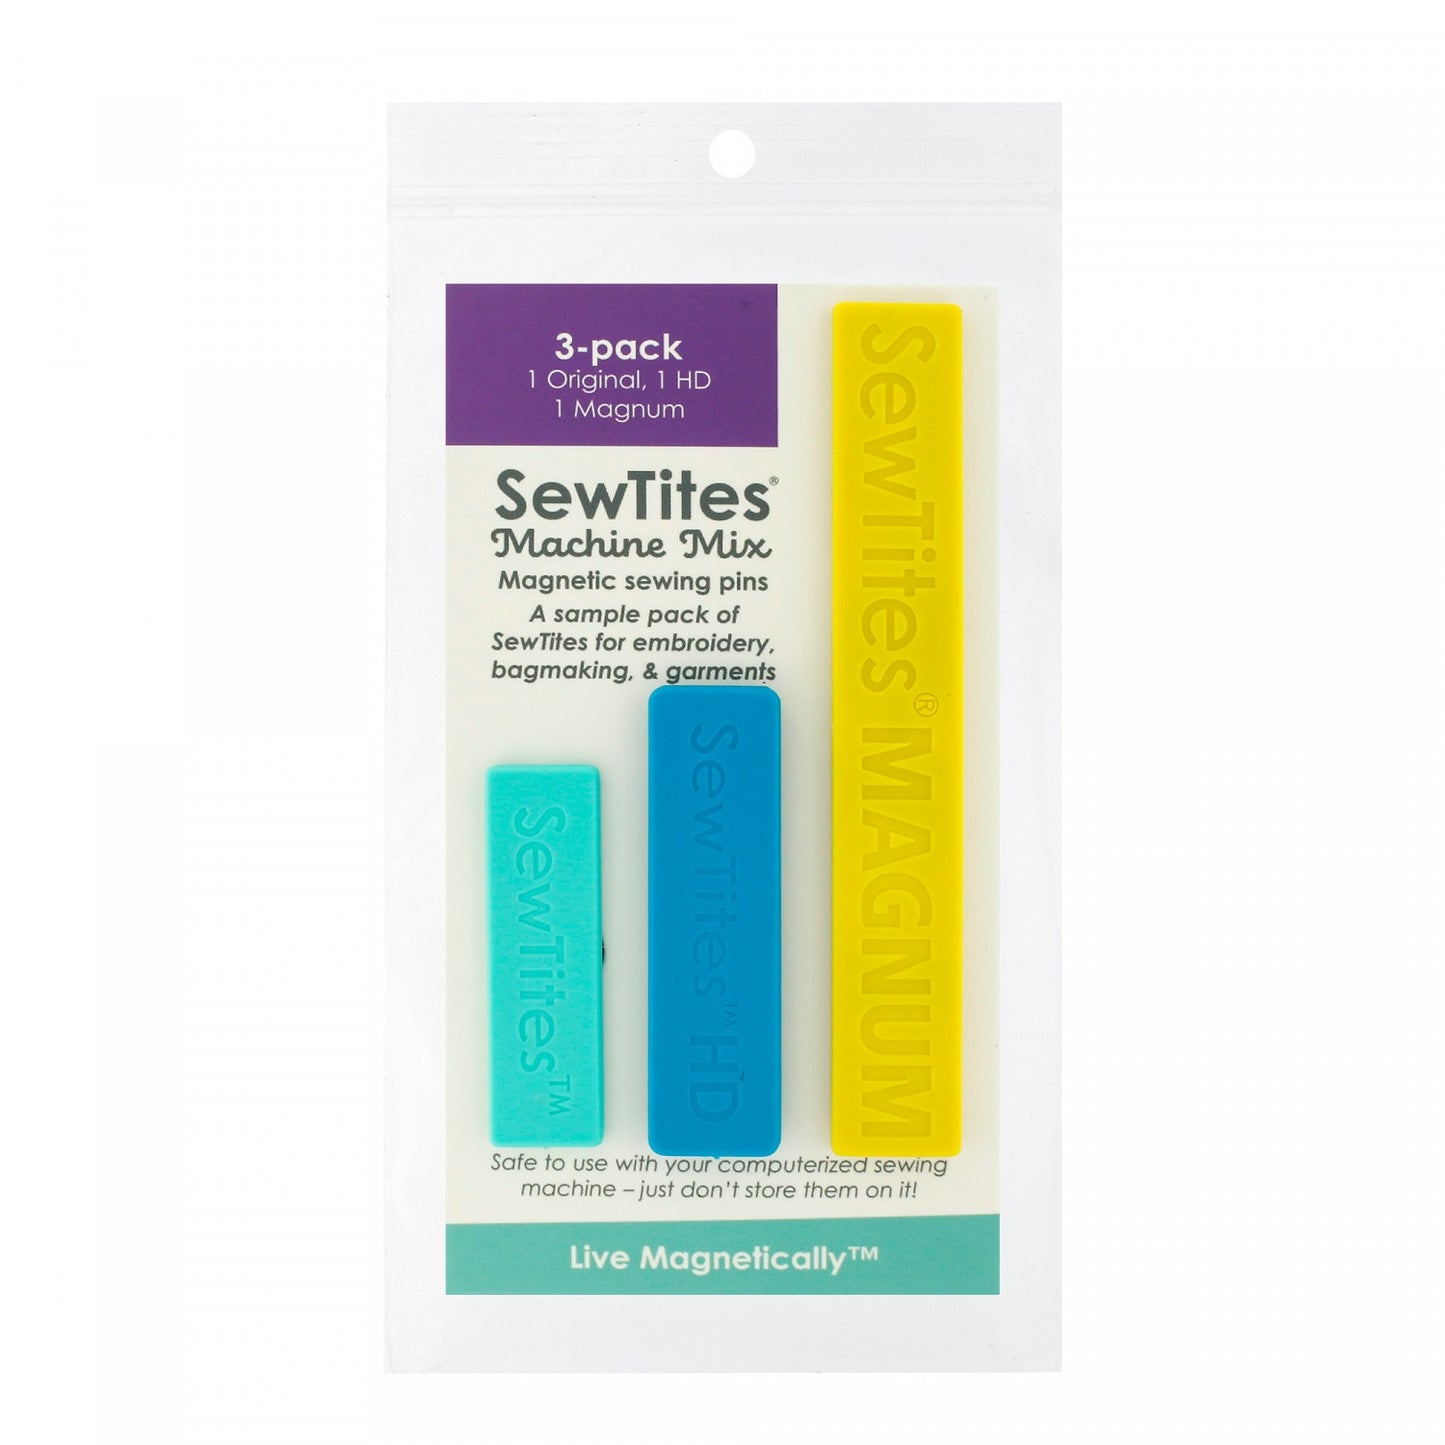 The SewTites Machine Mix packs contain a combination of models for machine embroidery, bagmaking, garment making, cosplay, and more – our Originals, HDs, and Magnums.  SewTites Specs:  Original - 1.78 x .5 in (45 x 13 mm) with three strong earth magnets on back HD - 2.125 x .5625"" (54 x 14.5 mm) with three very strong earth magnets on back Magnum - 3.98” x .59” (101 x 15 mm) each with five stronger earth magnets on back  Made of: Plastic and Metal Use: Magnetic Sewing pins Included: 3 magnets per package